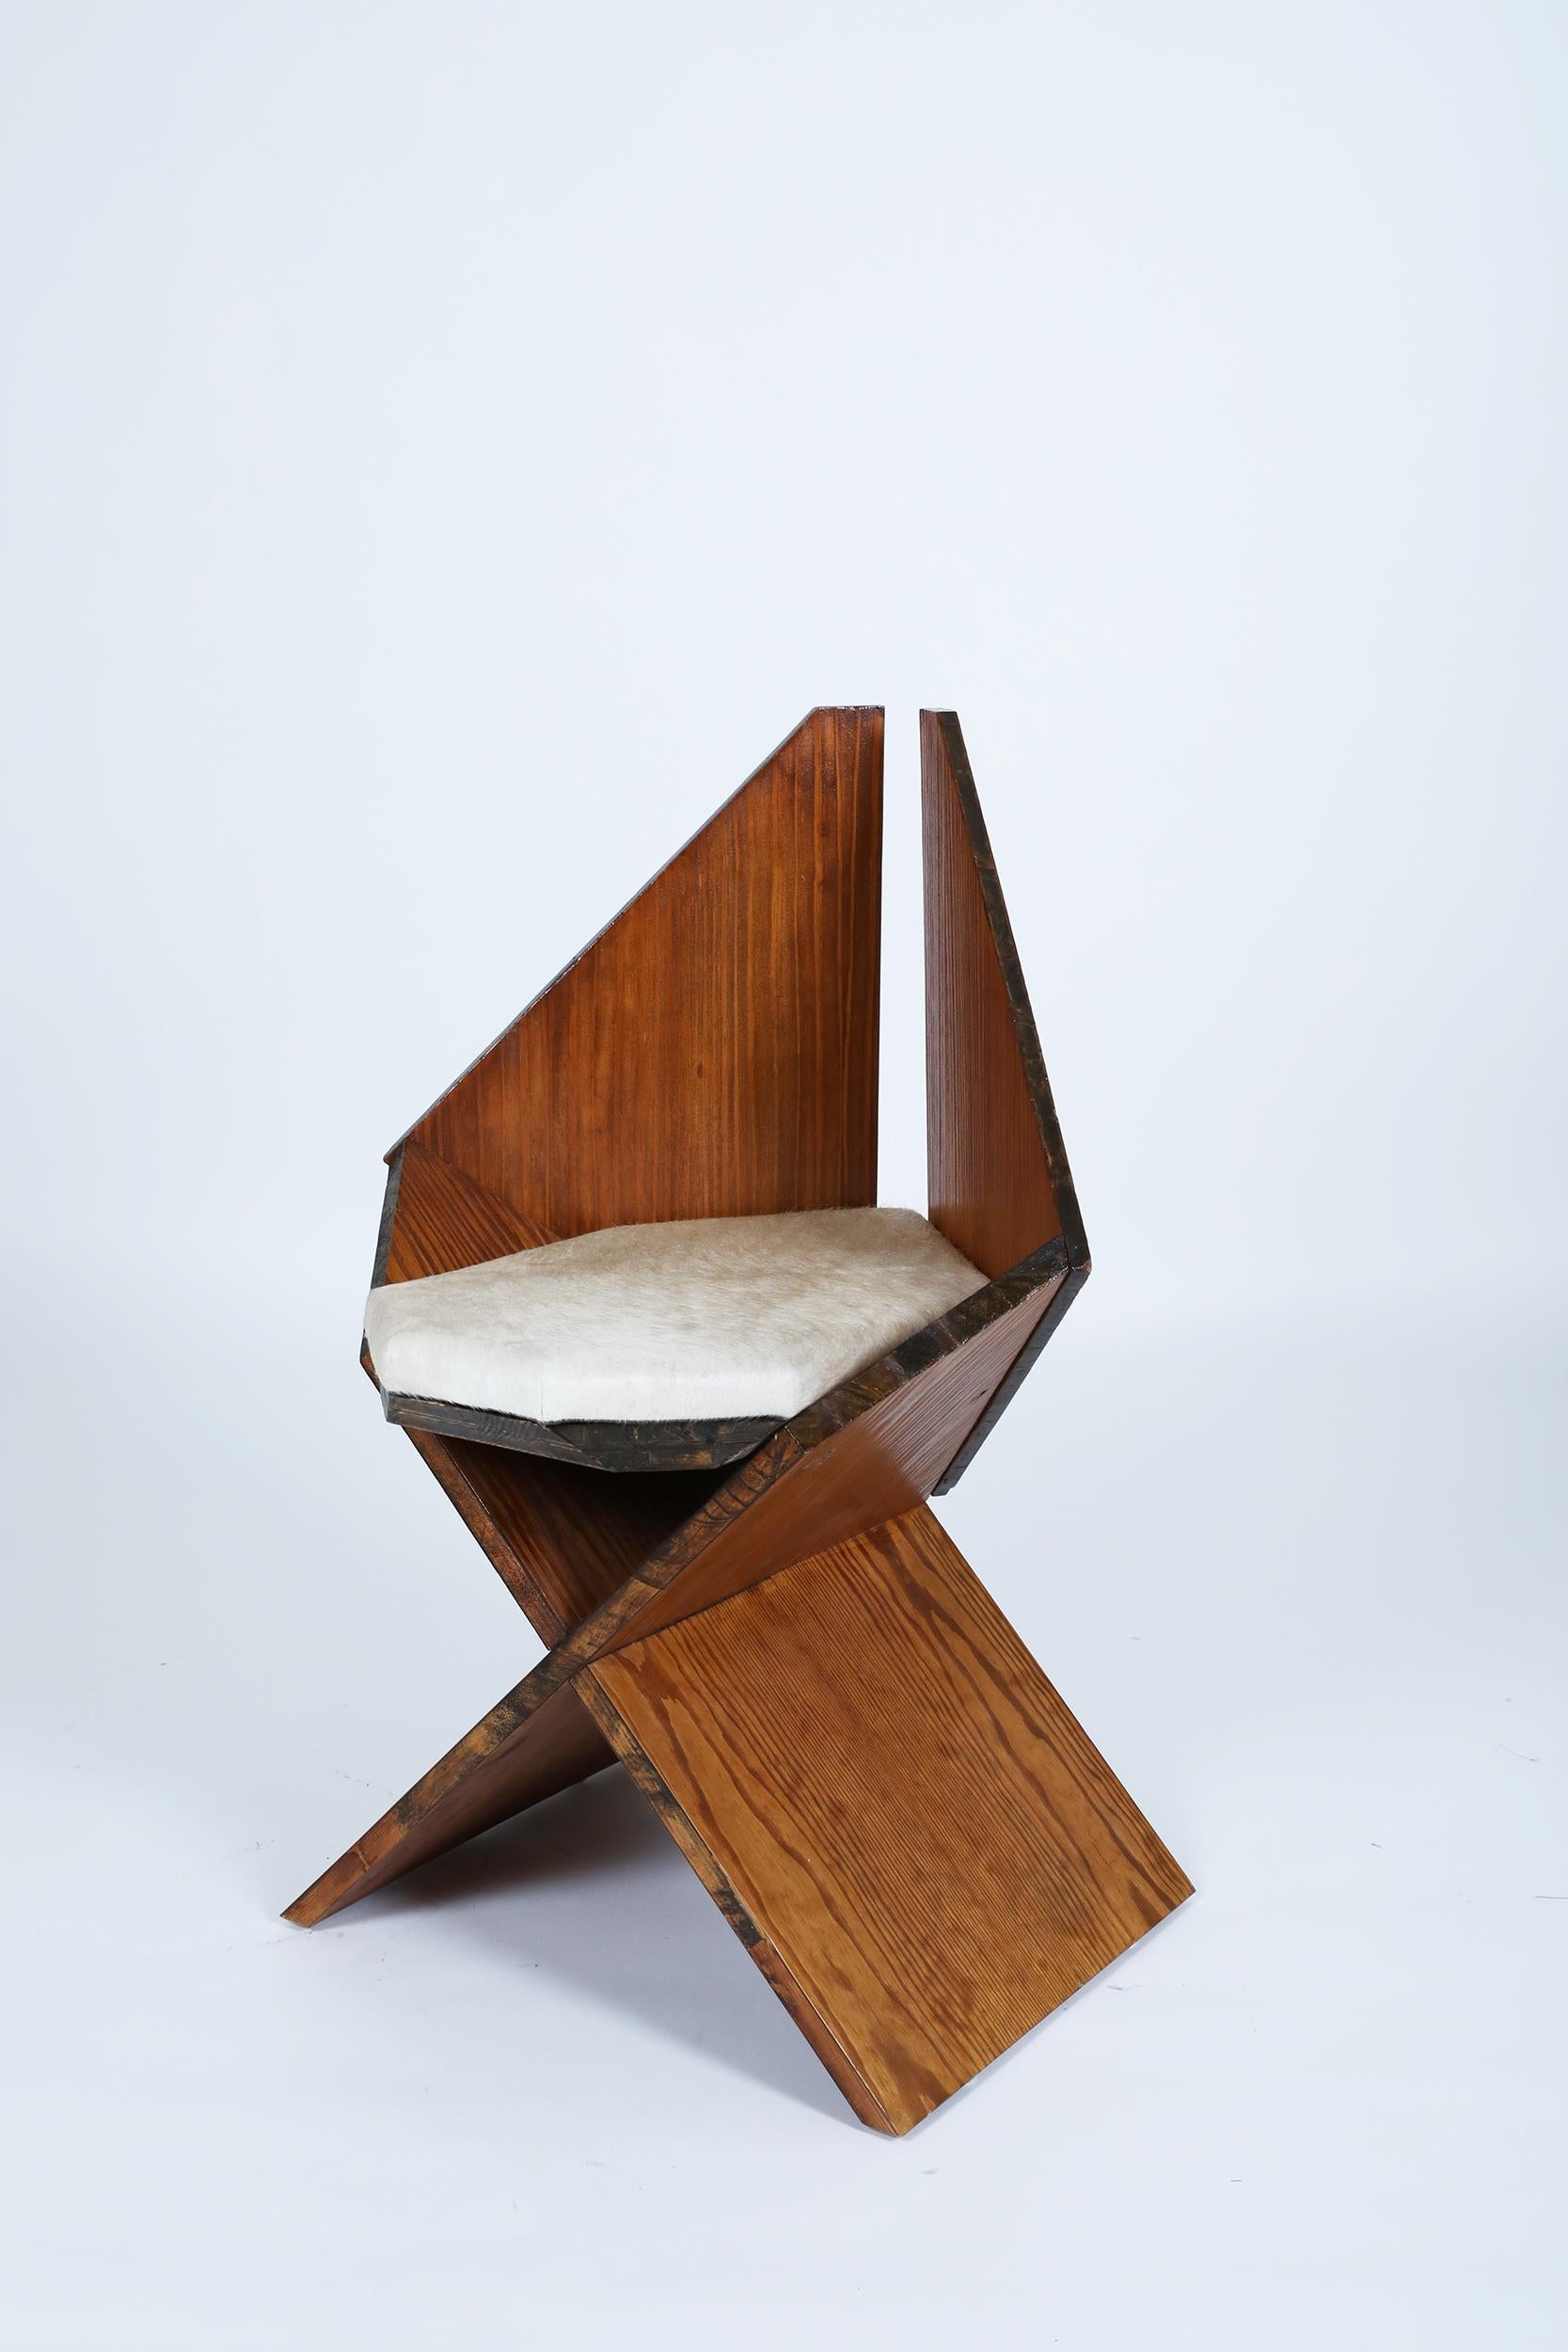 Chair by Hervé Baley c. 1991-1992. Made of Oregon pine on structured wood.